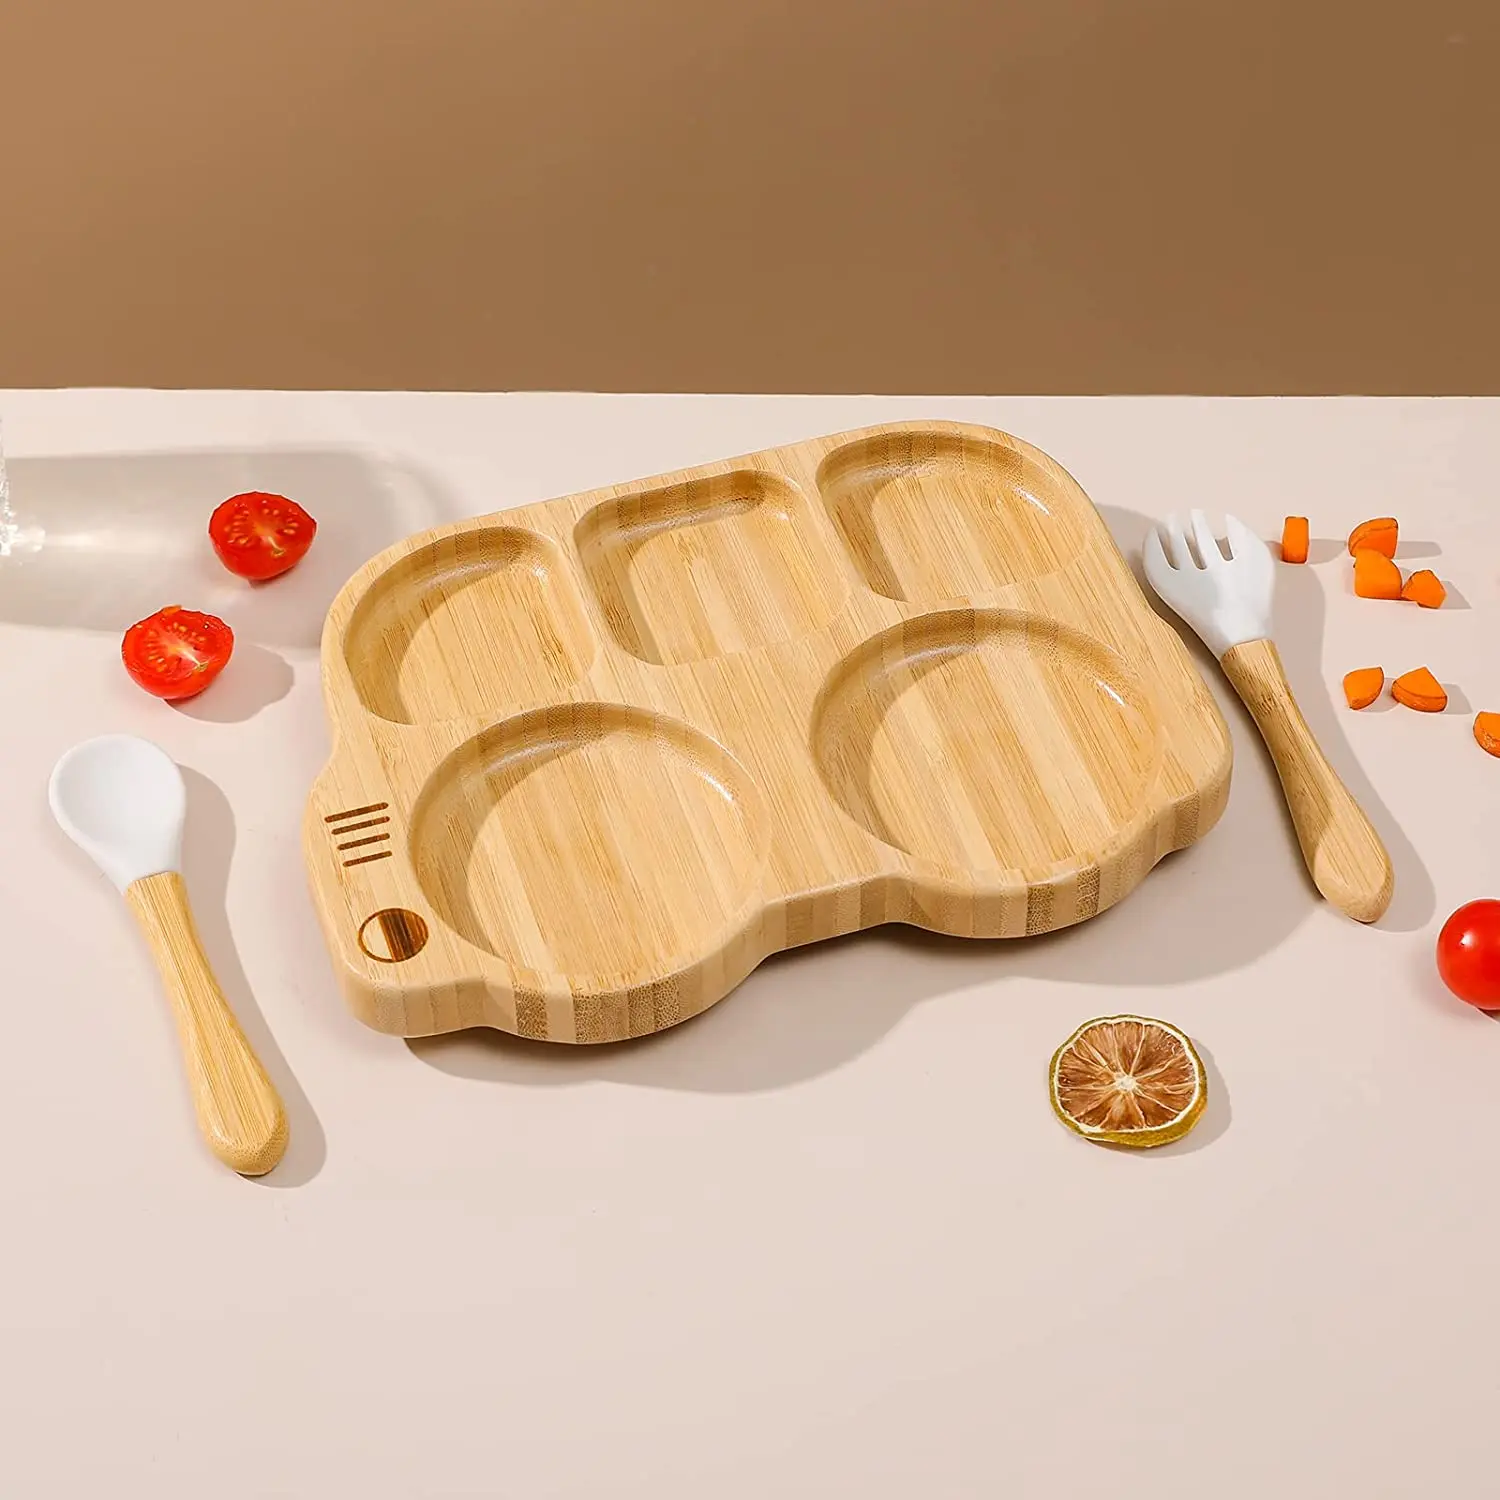 Cute Animal Appearance Shape Platter for Children Bamboo Kids Plates Bamboo Plates Baby Kids Hot Sale Wood Plate